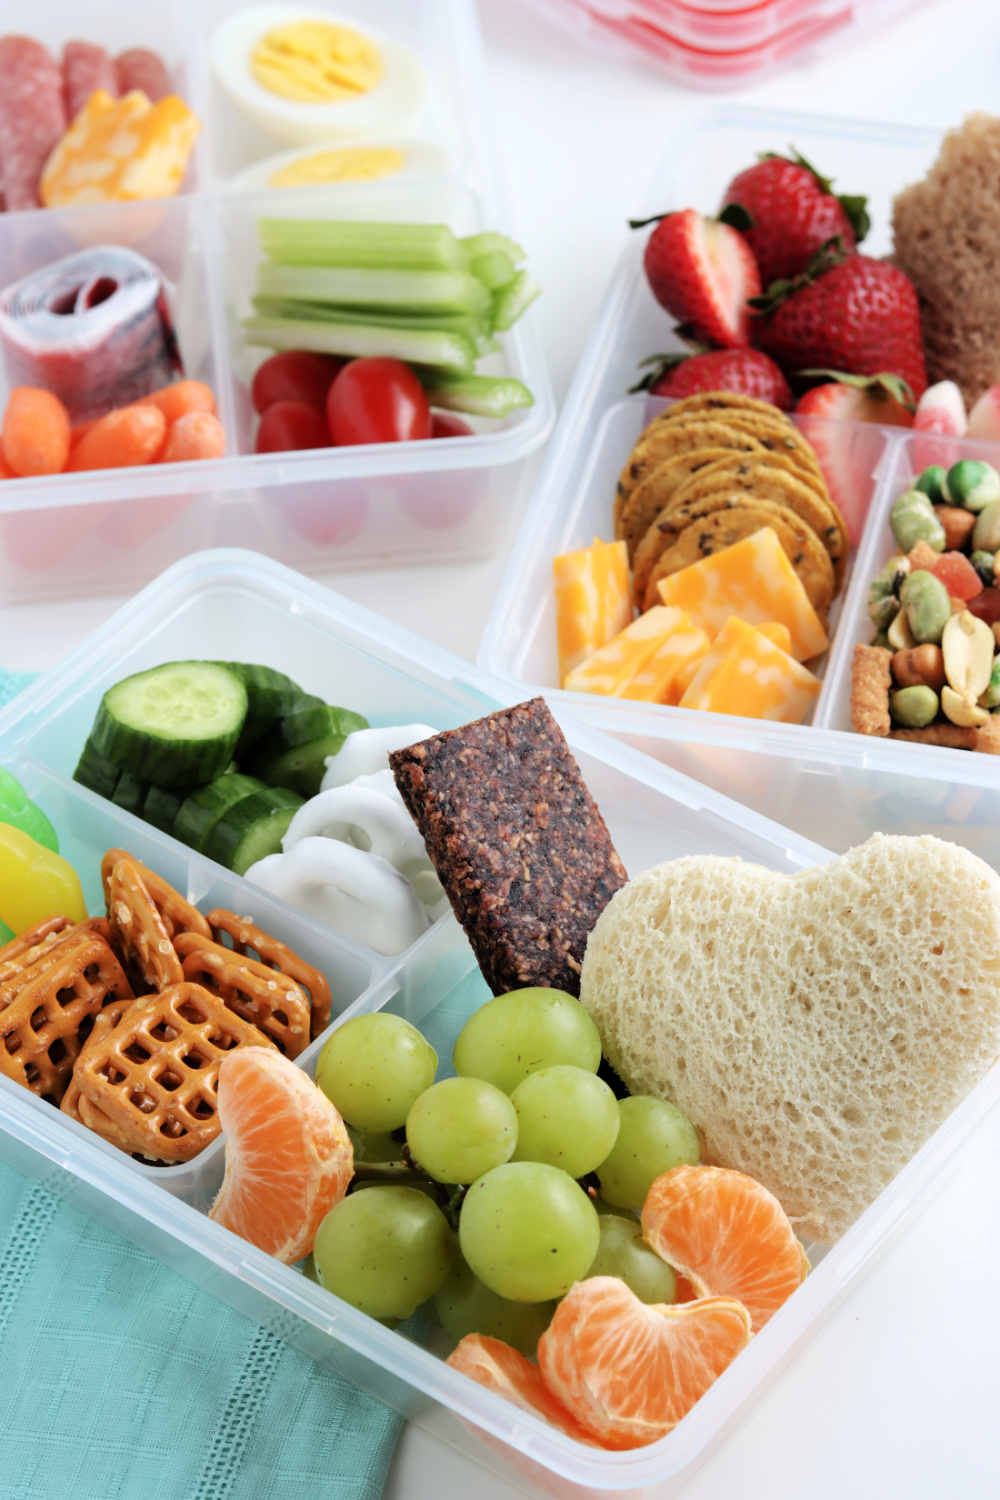 Easy Lunchbox Ideas for Kids from The Rockstar Mommy